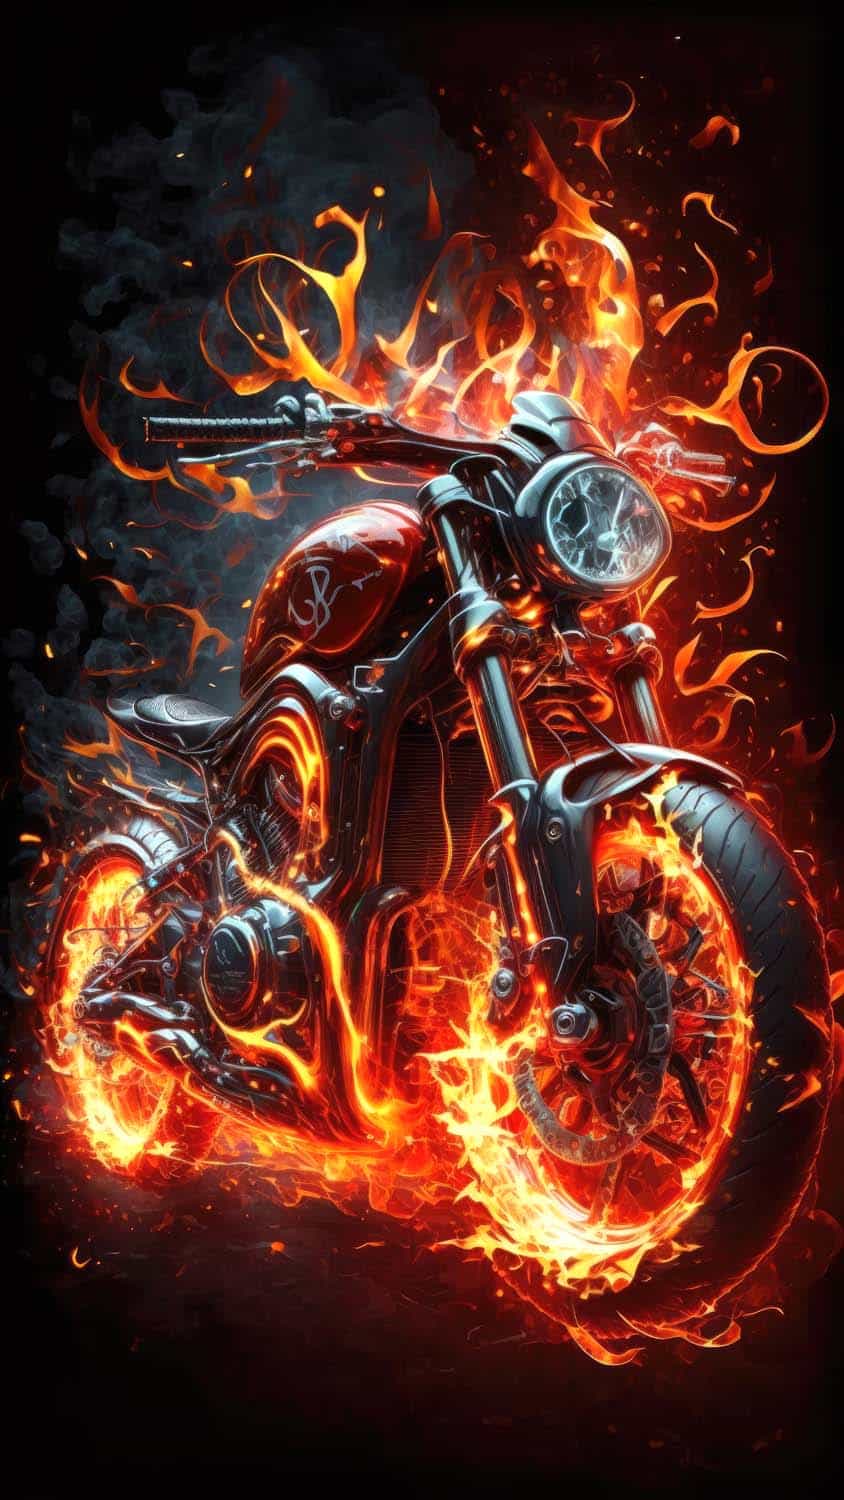 Ghost Rider Motorcycle IPhone Wallpaper HD - IPhone Wallpapers ...